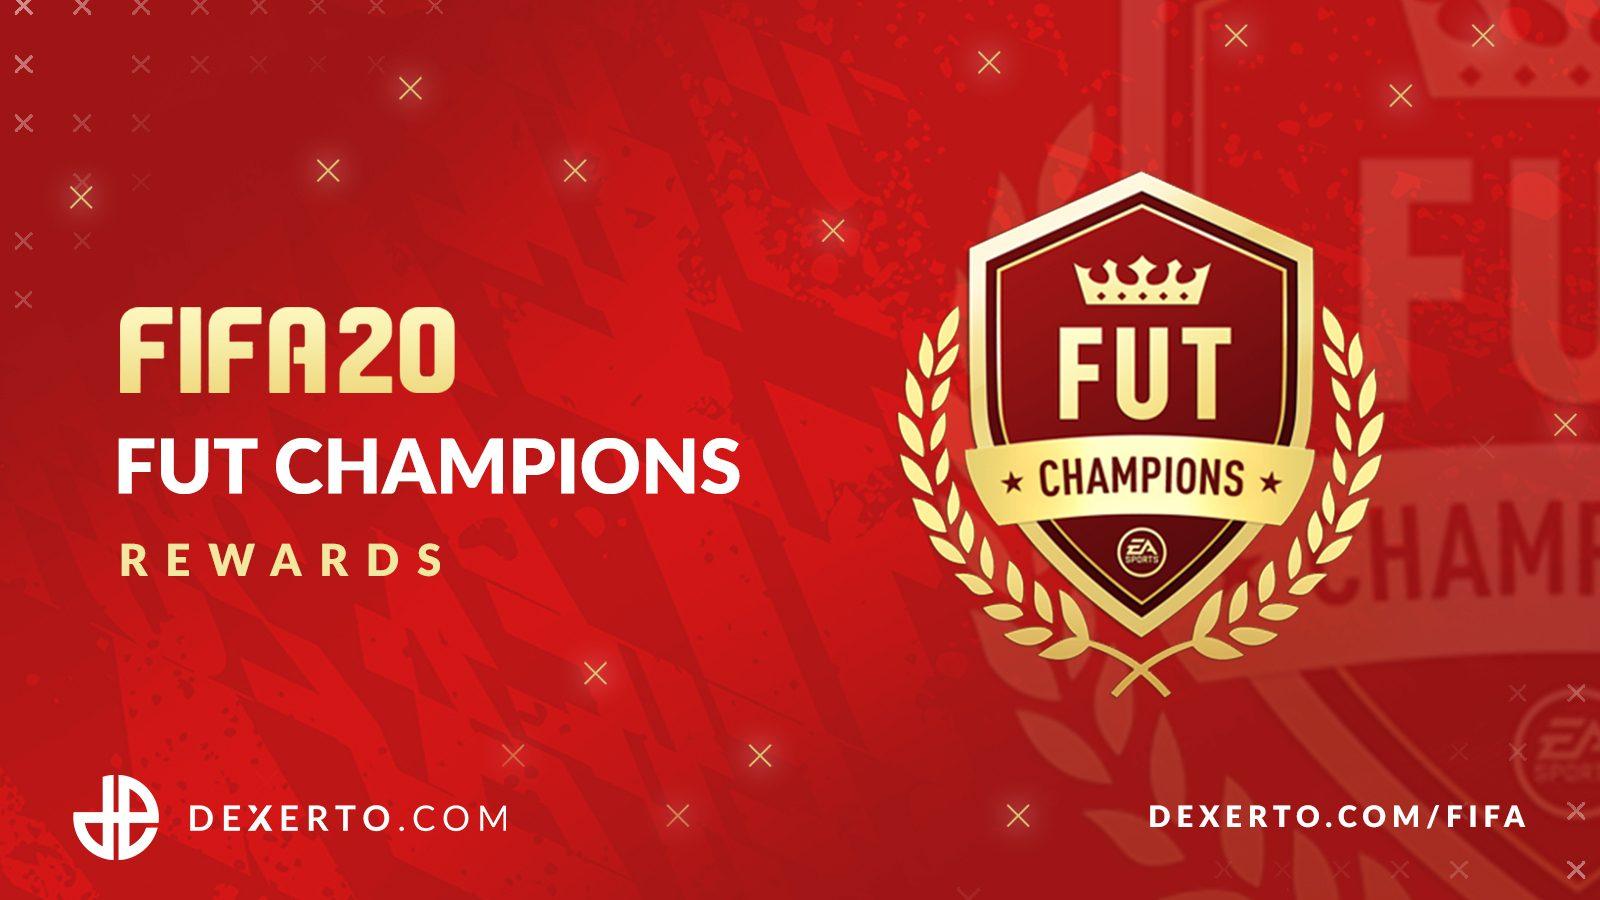 When is the FIFA 21 Web App coming out? FUT Companion App - Dexerto